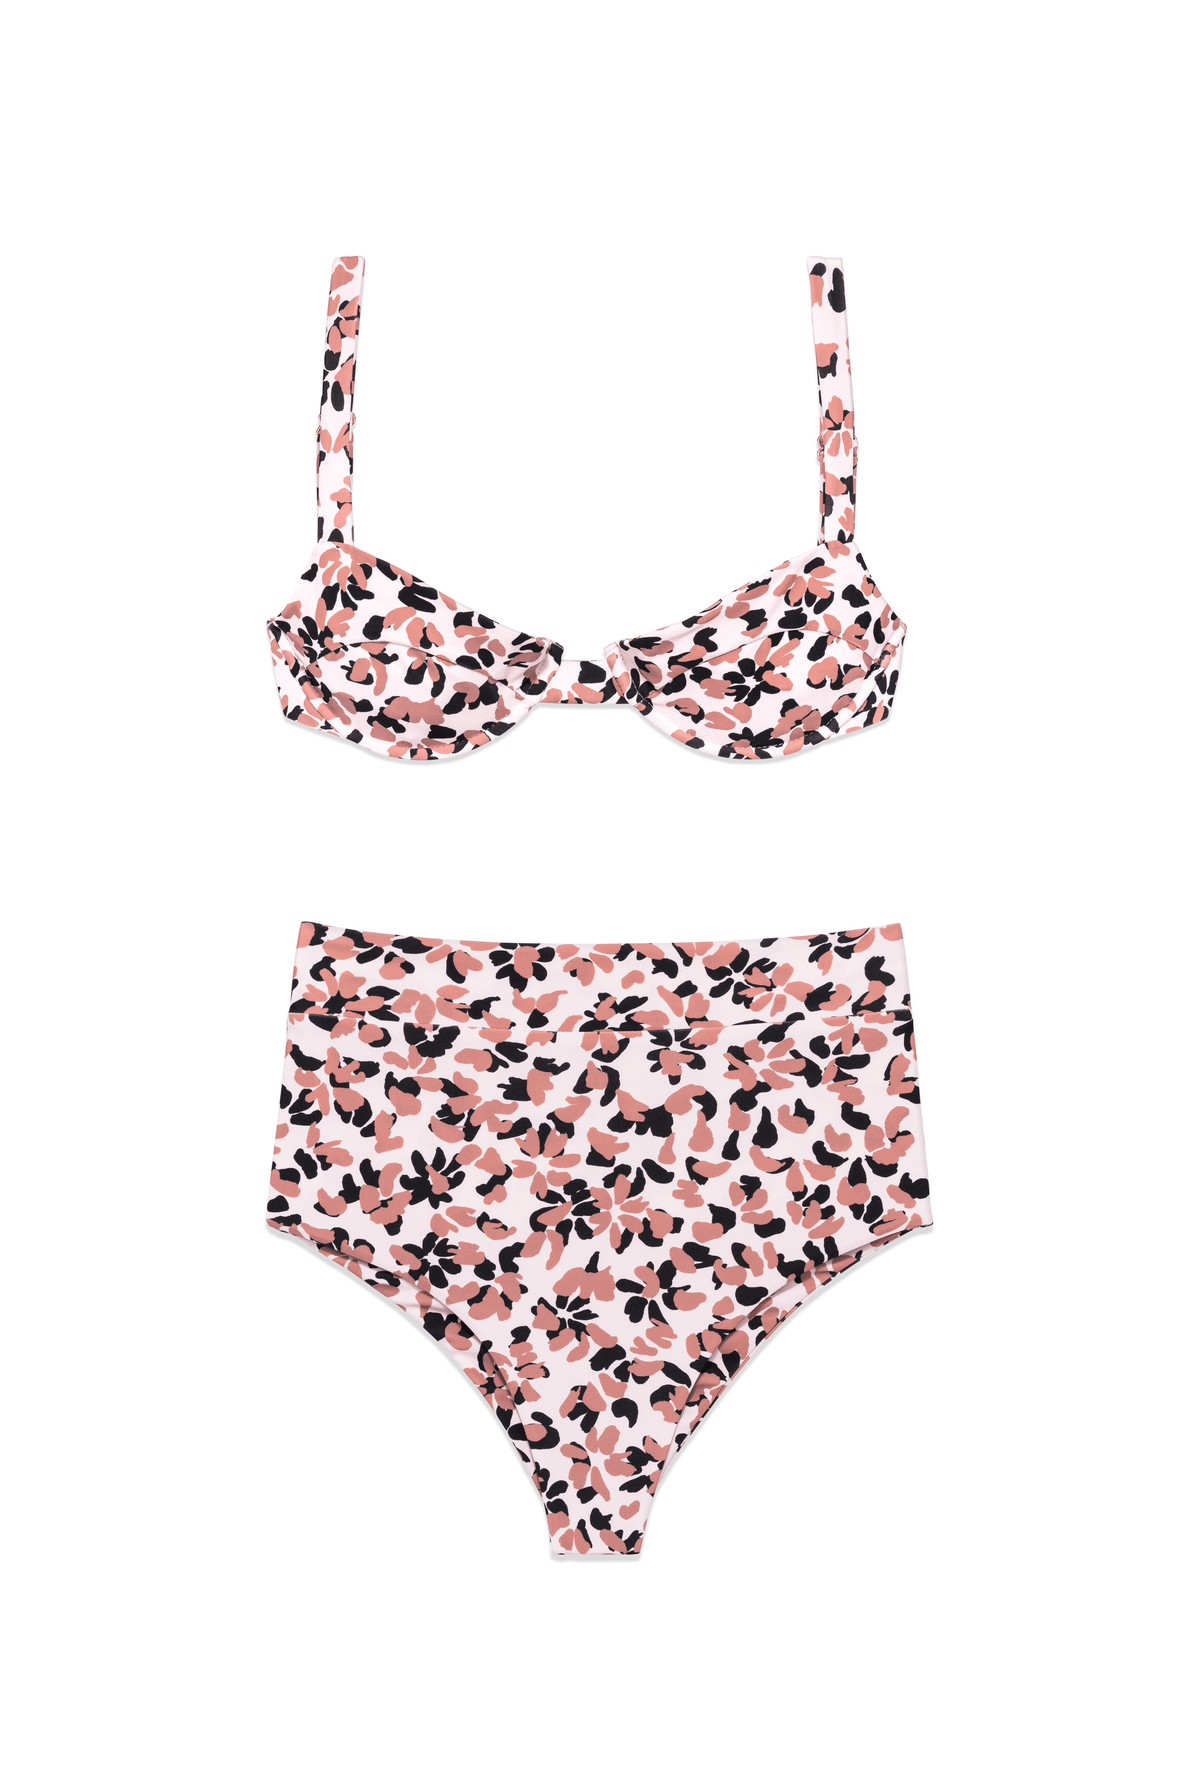 Izzy Top/ Isla Bottom Set in Pink Floral